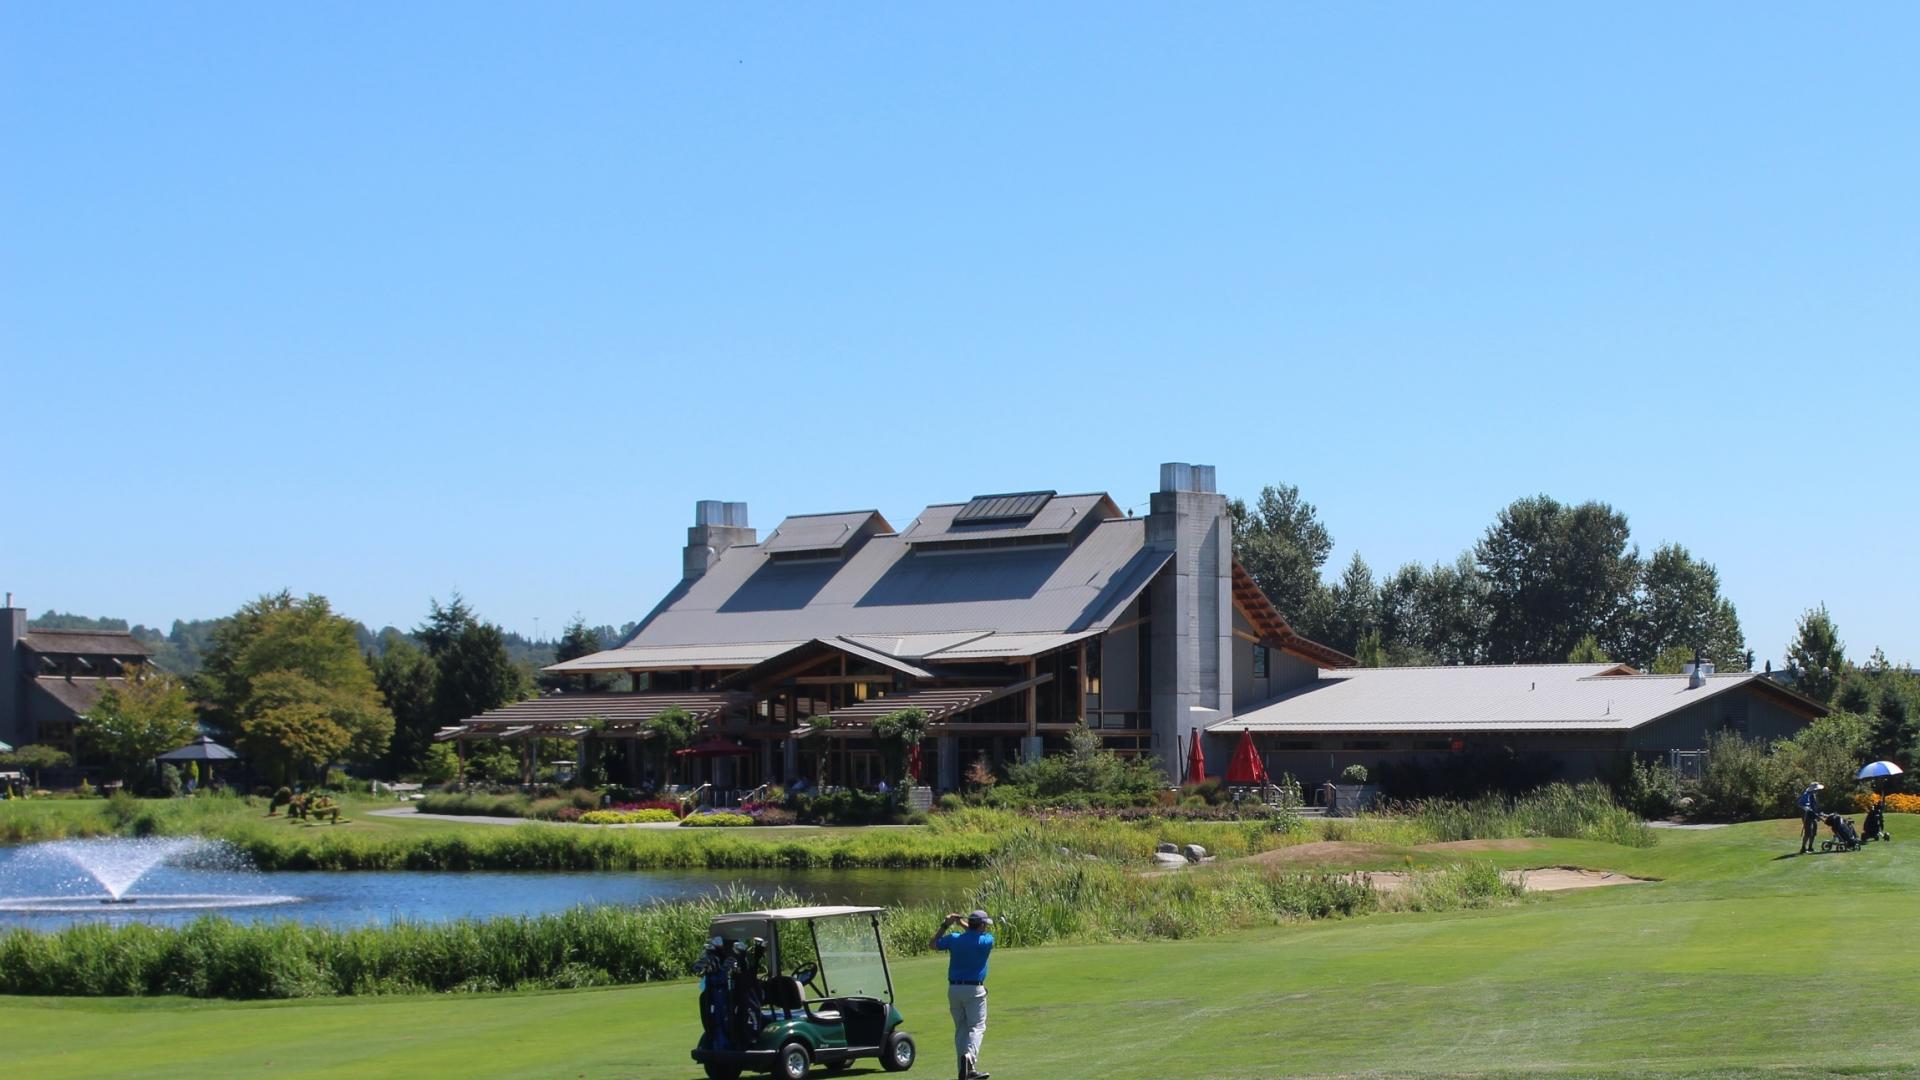 Riverway Clubhouse serves as the backdrop for a golfer taking a swing